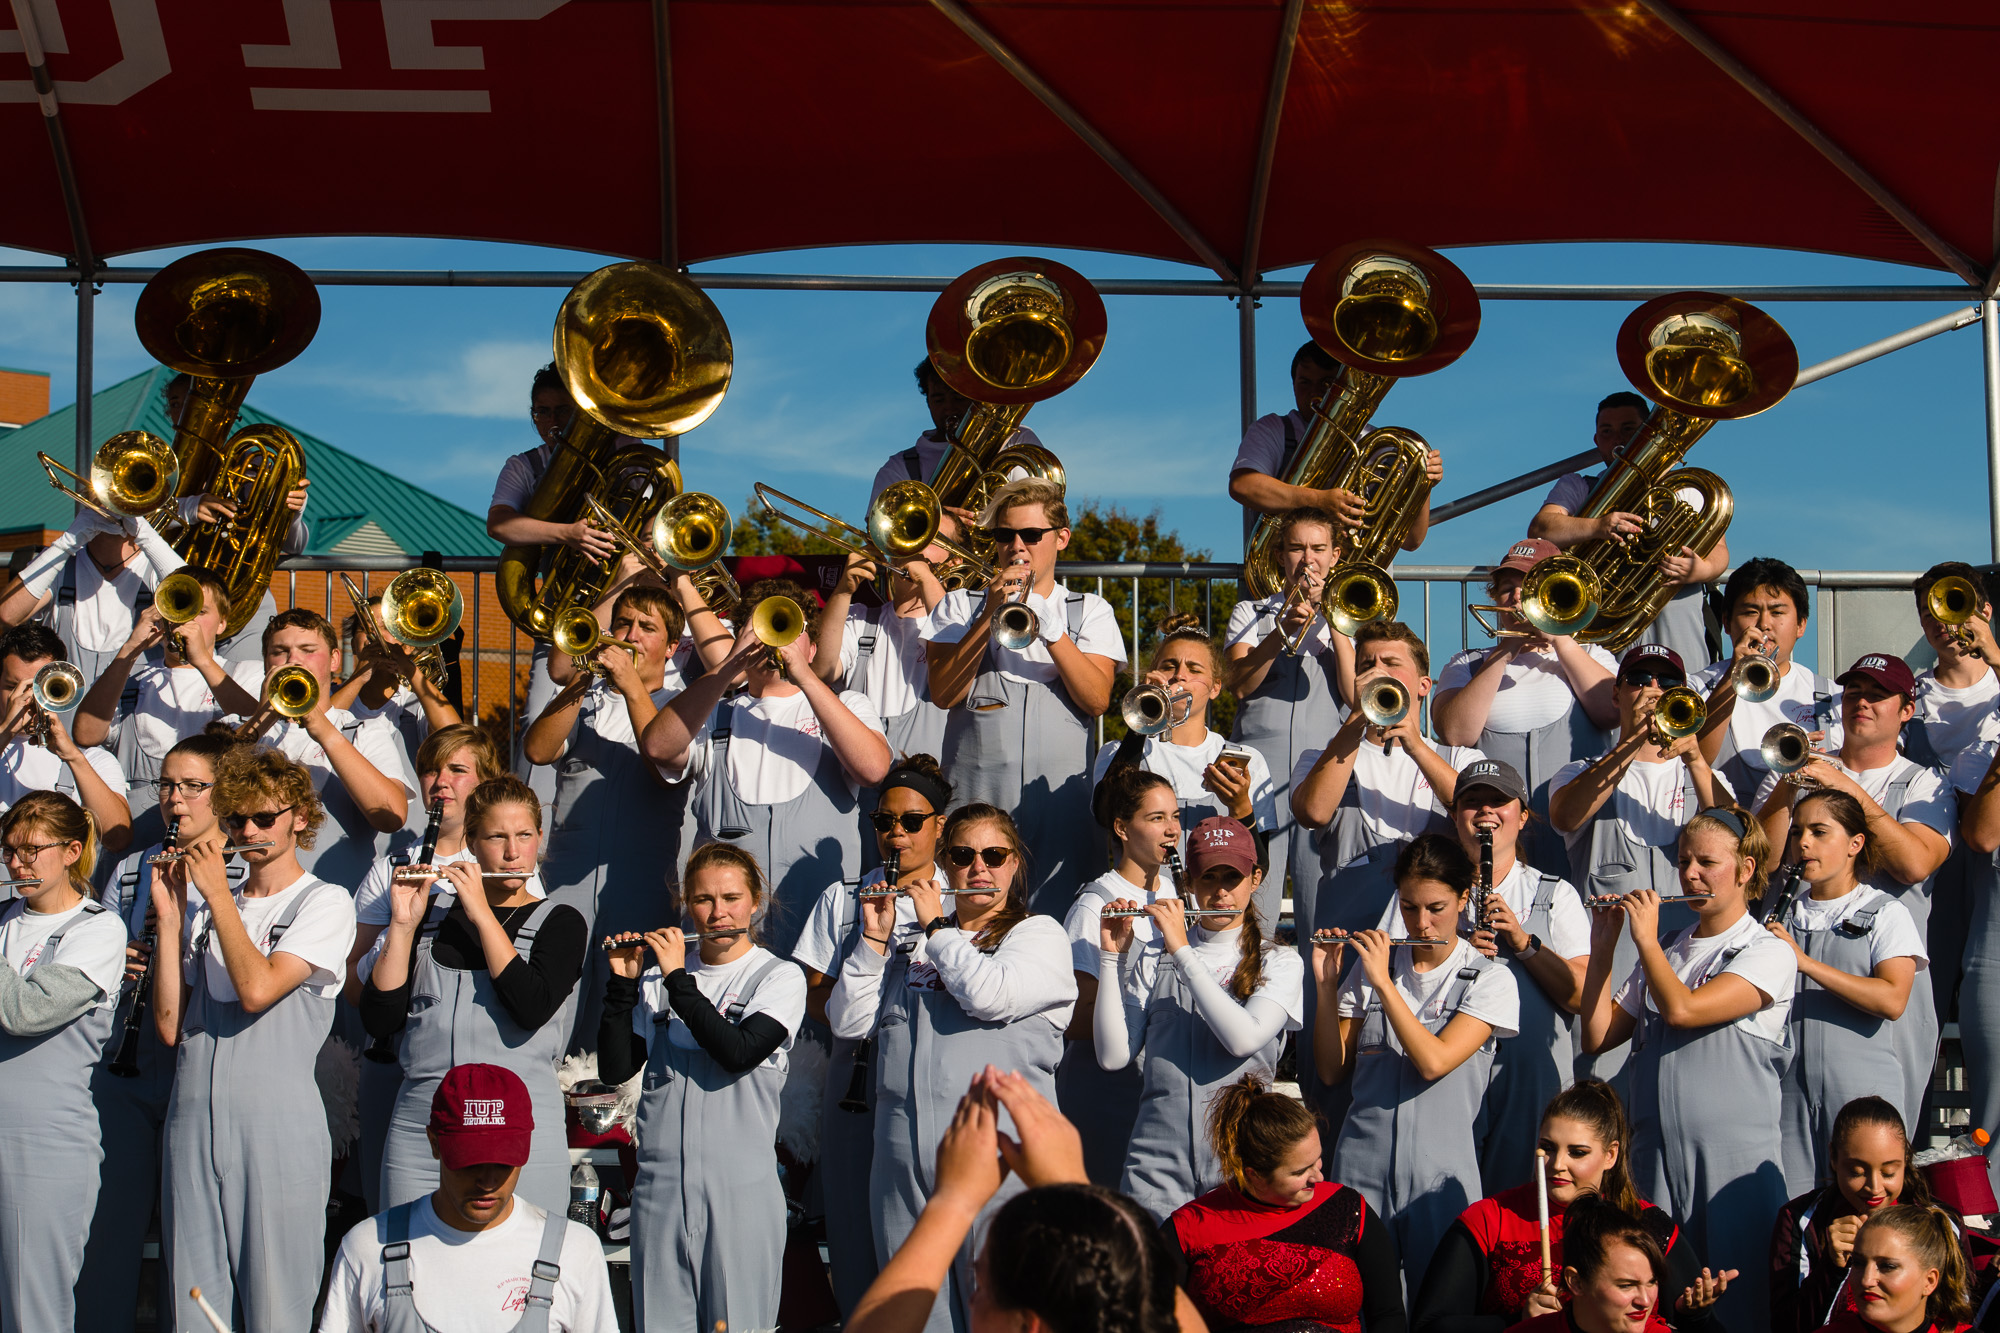 The band plays a final fight song during the 2019 homecoming game between IUP and Cal U.